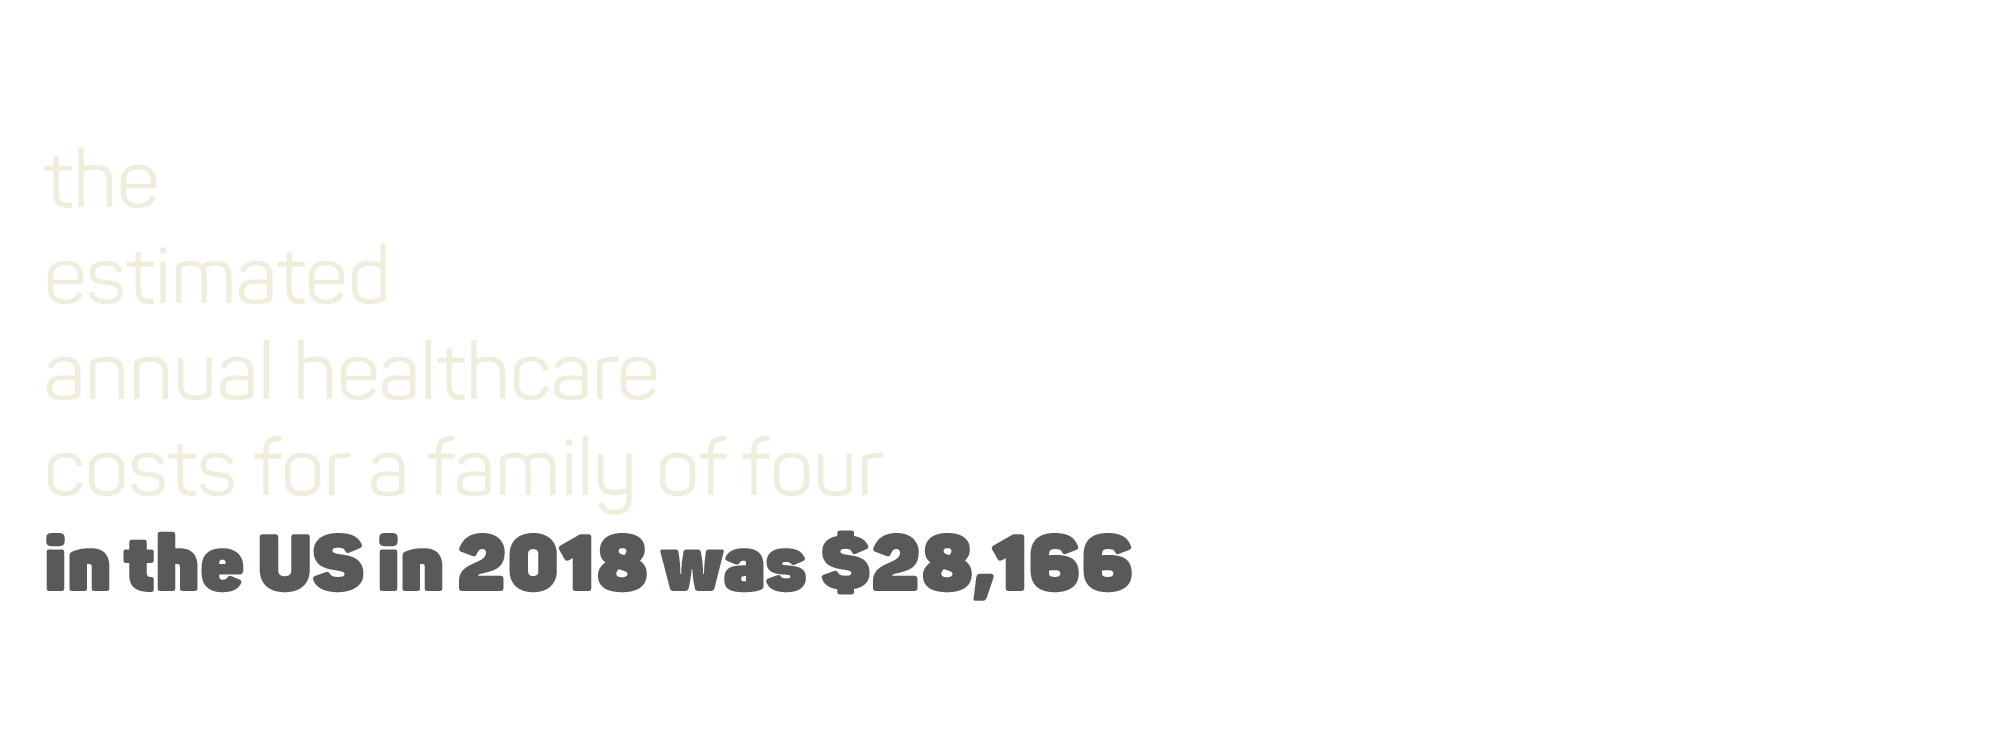 The estimated annual healthcare costs for a family of four in the US in 2018 was $28,166